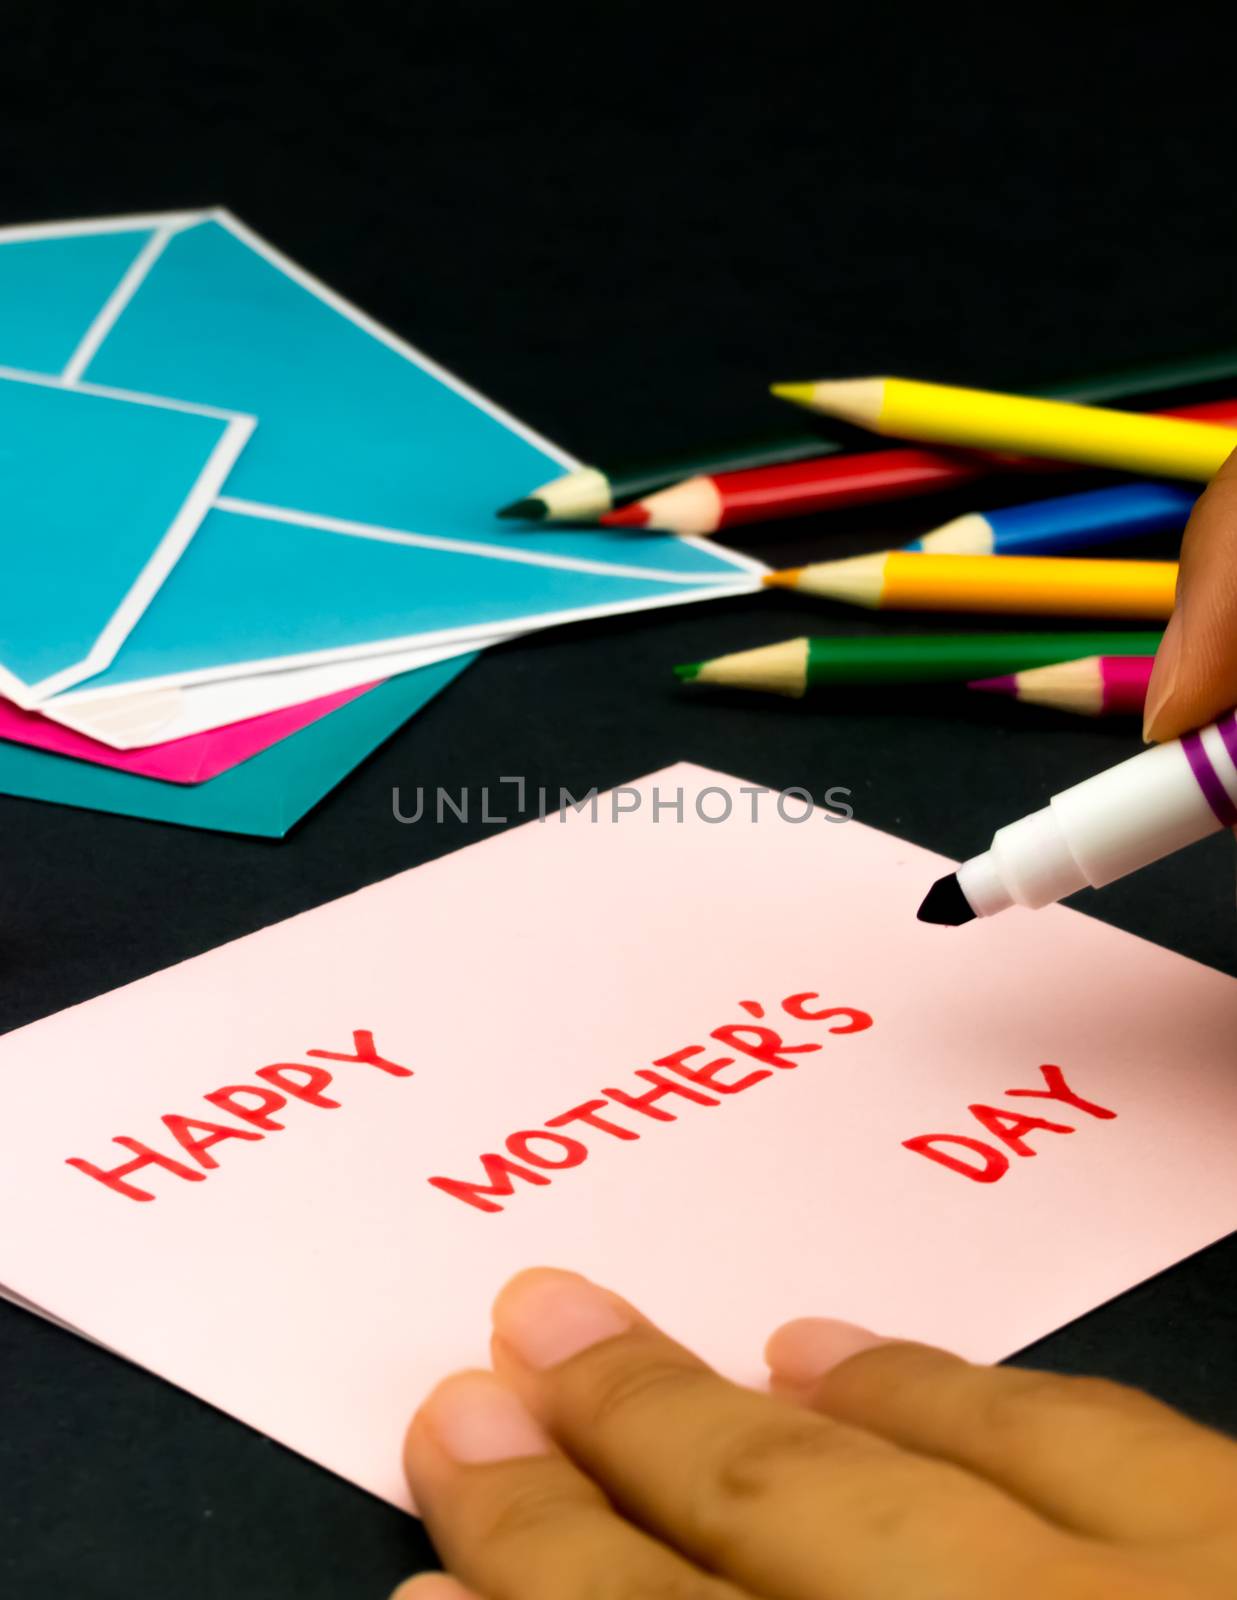 Message Card for Your Family and Friends; Happy Mother's Day by EikoTsuttiy